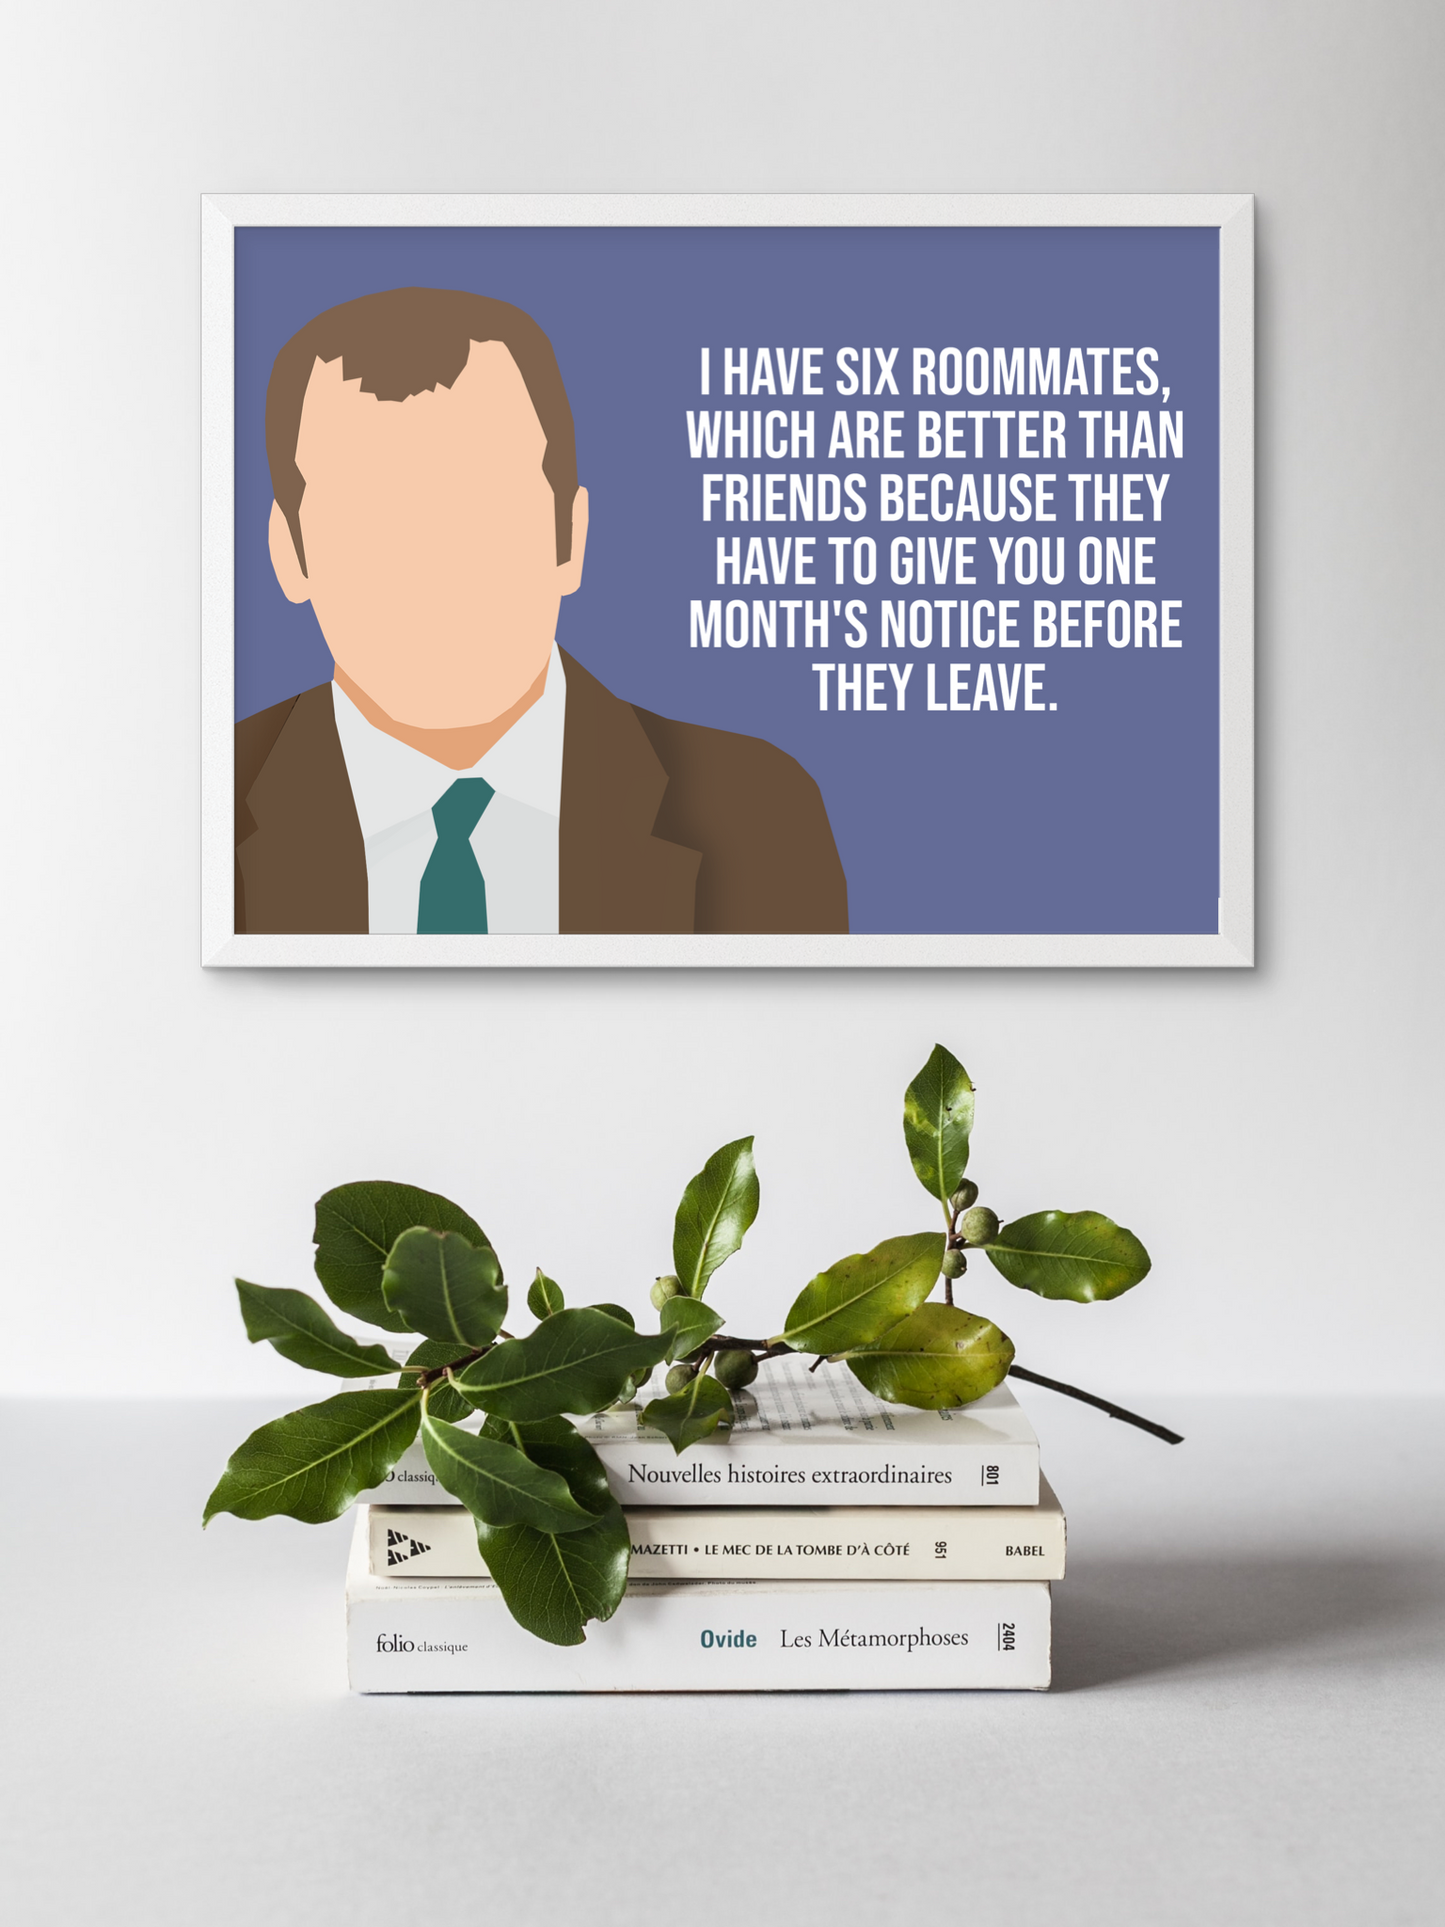 Toby Flenderson Art Print with Funny Quote